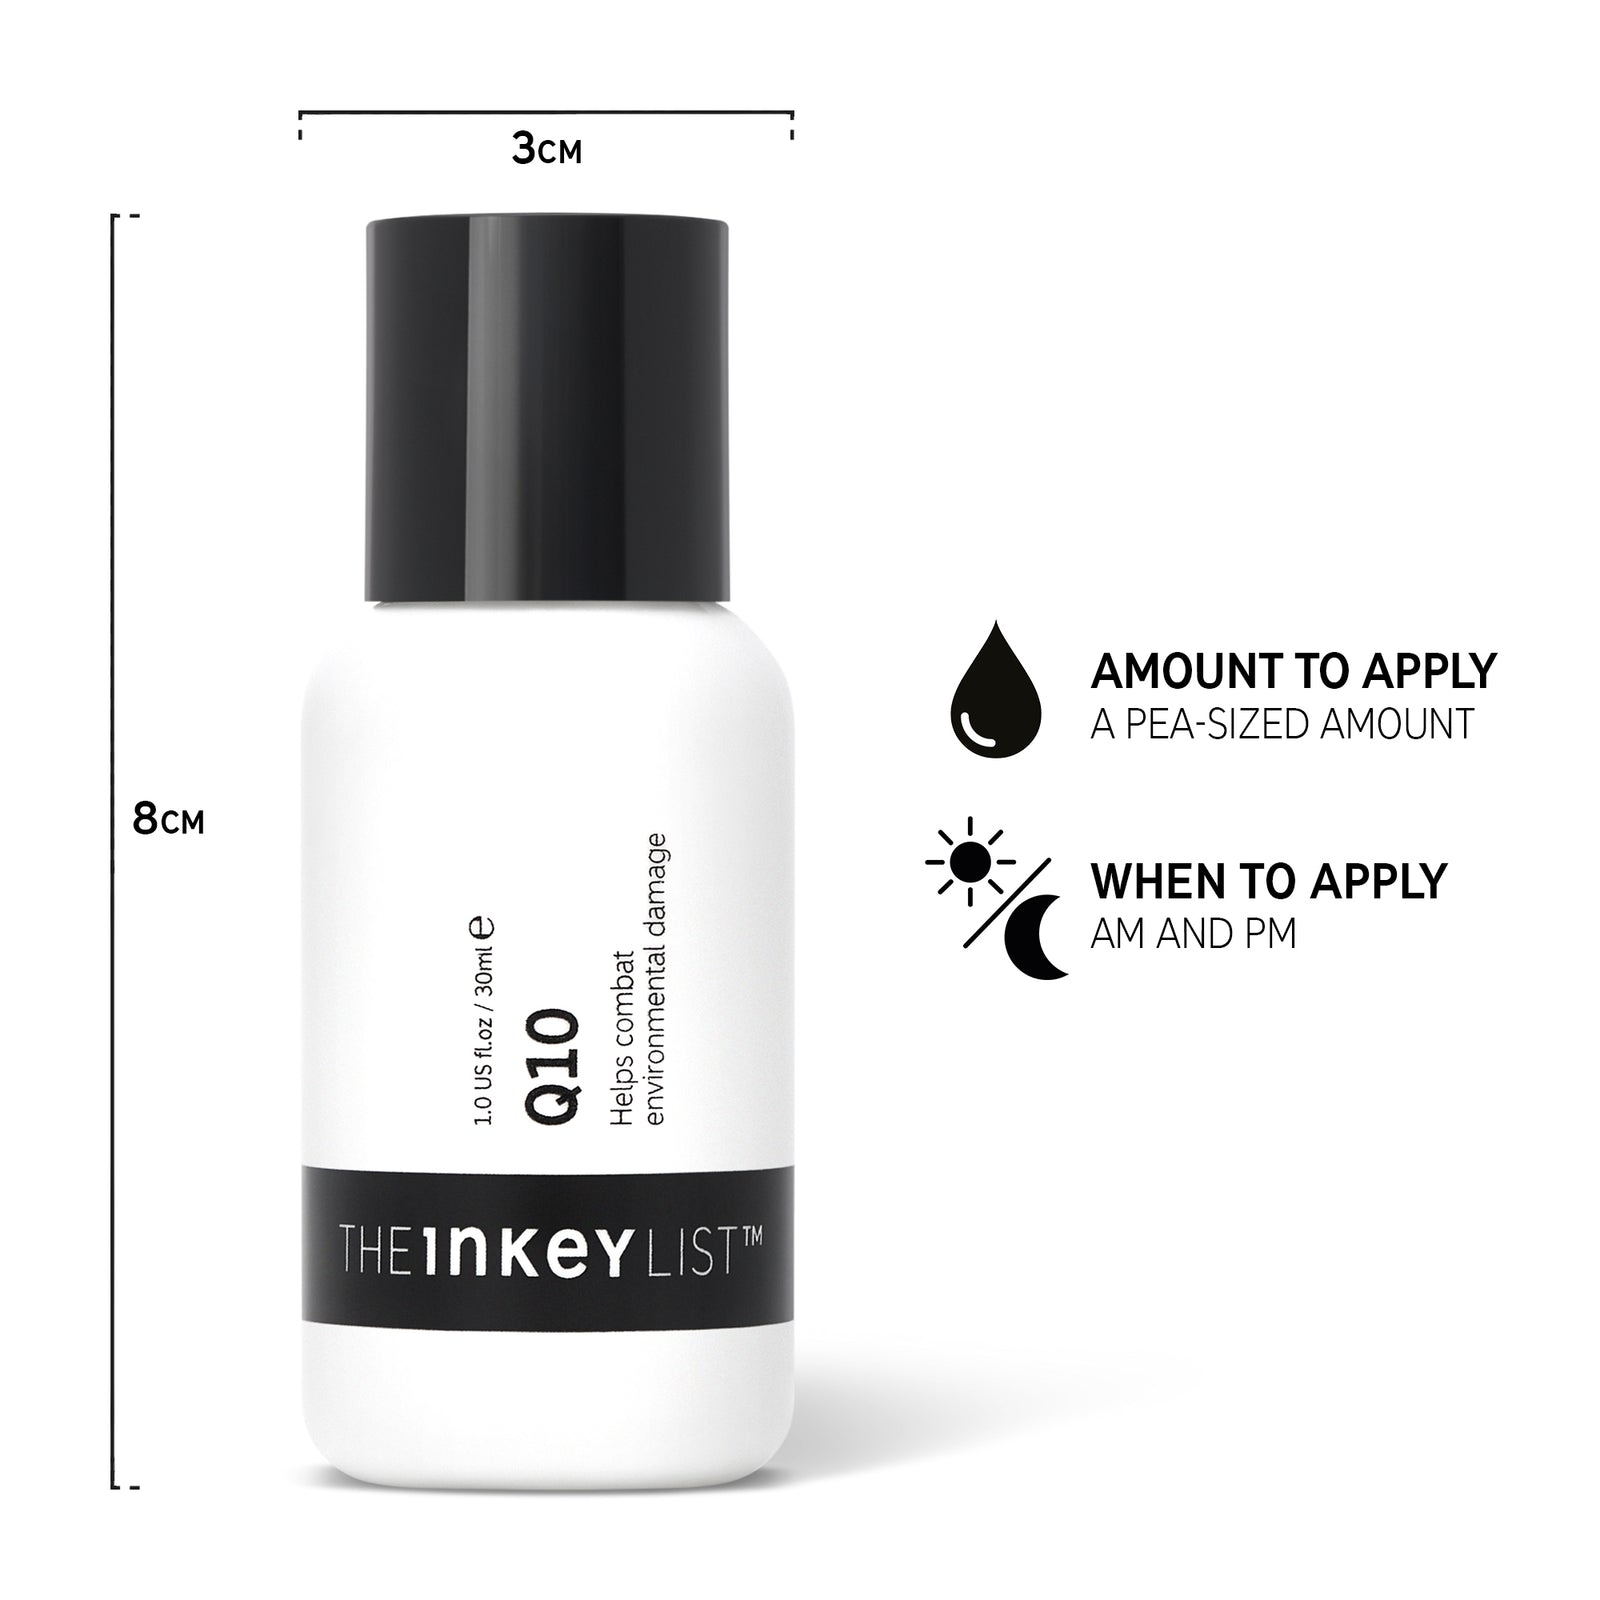 Q10 Serum pack shot annotated with text 'Amount to apply (pea-sized amount)' and 'When to apply (AM and PM)'